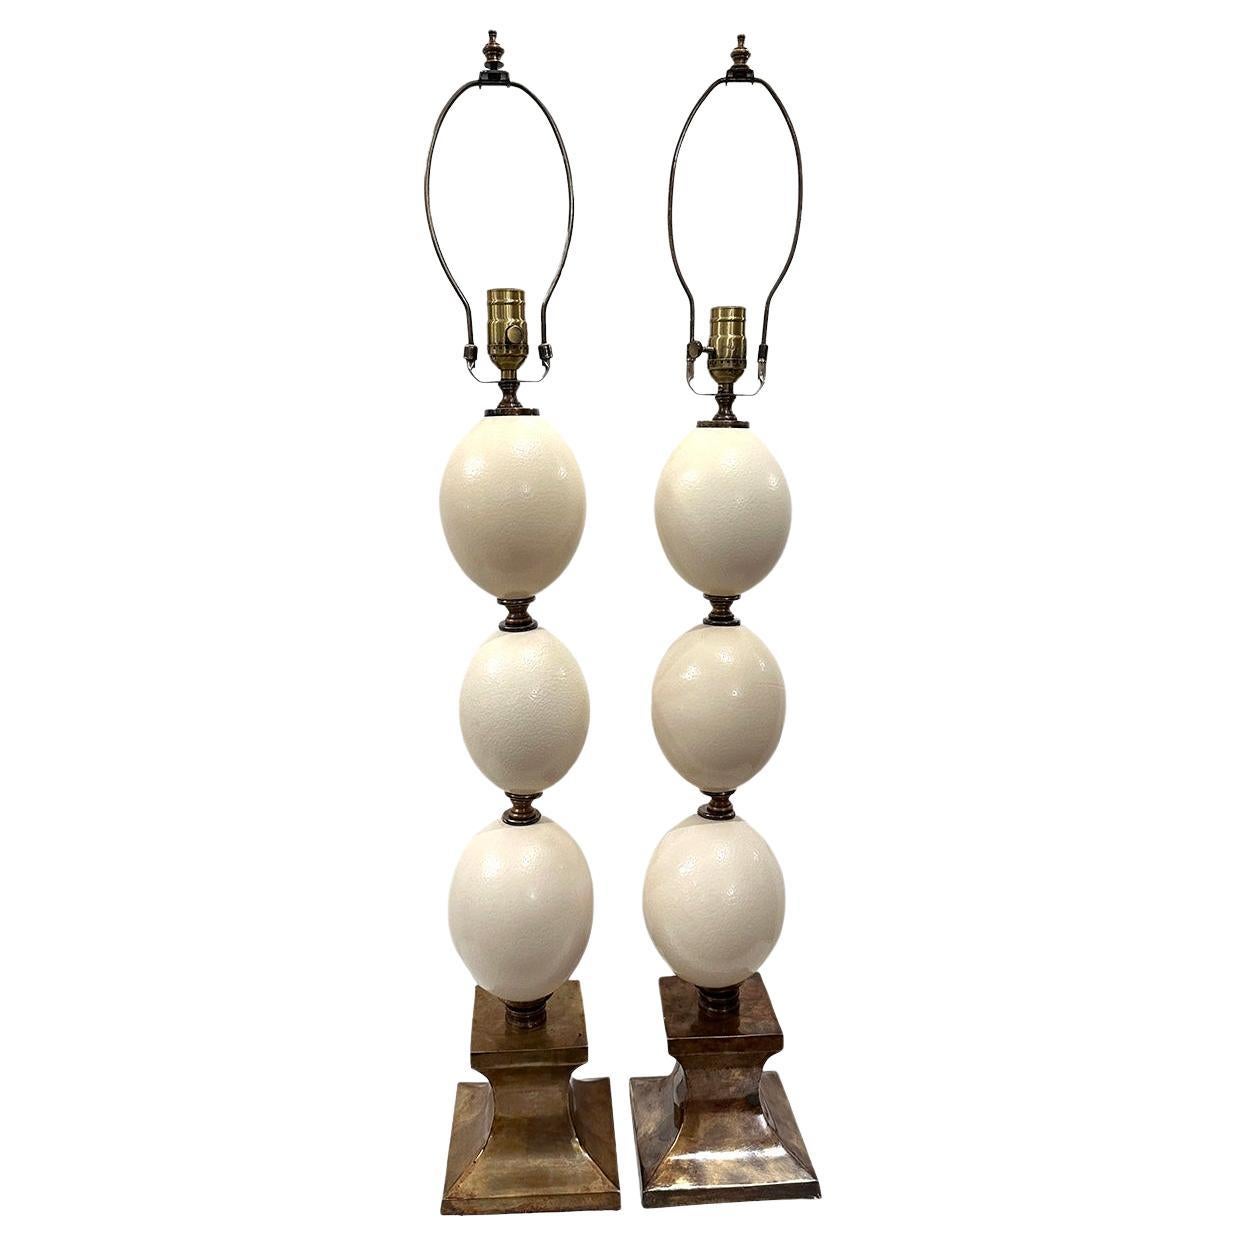 Pair of French Ostrich Egg Lamps